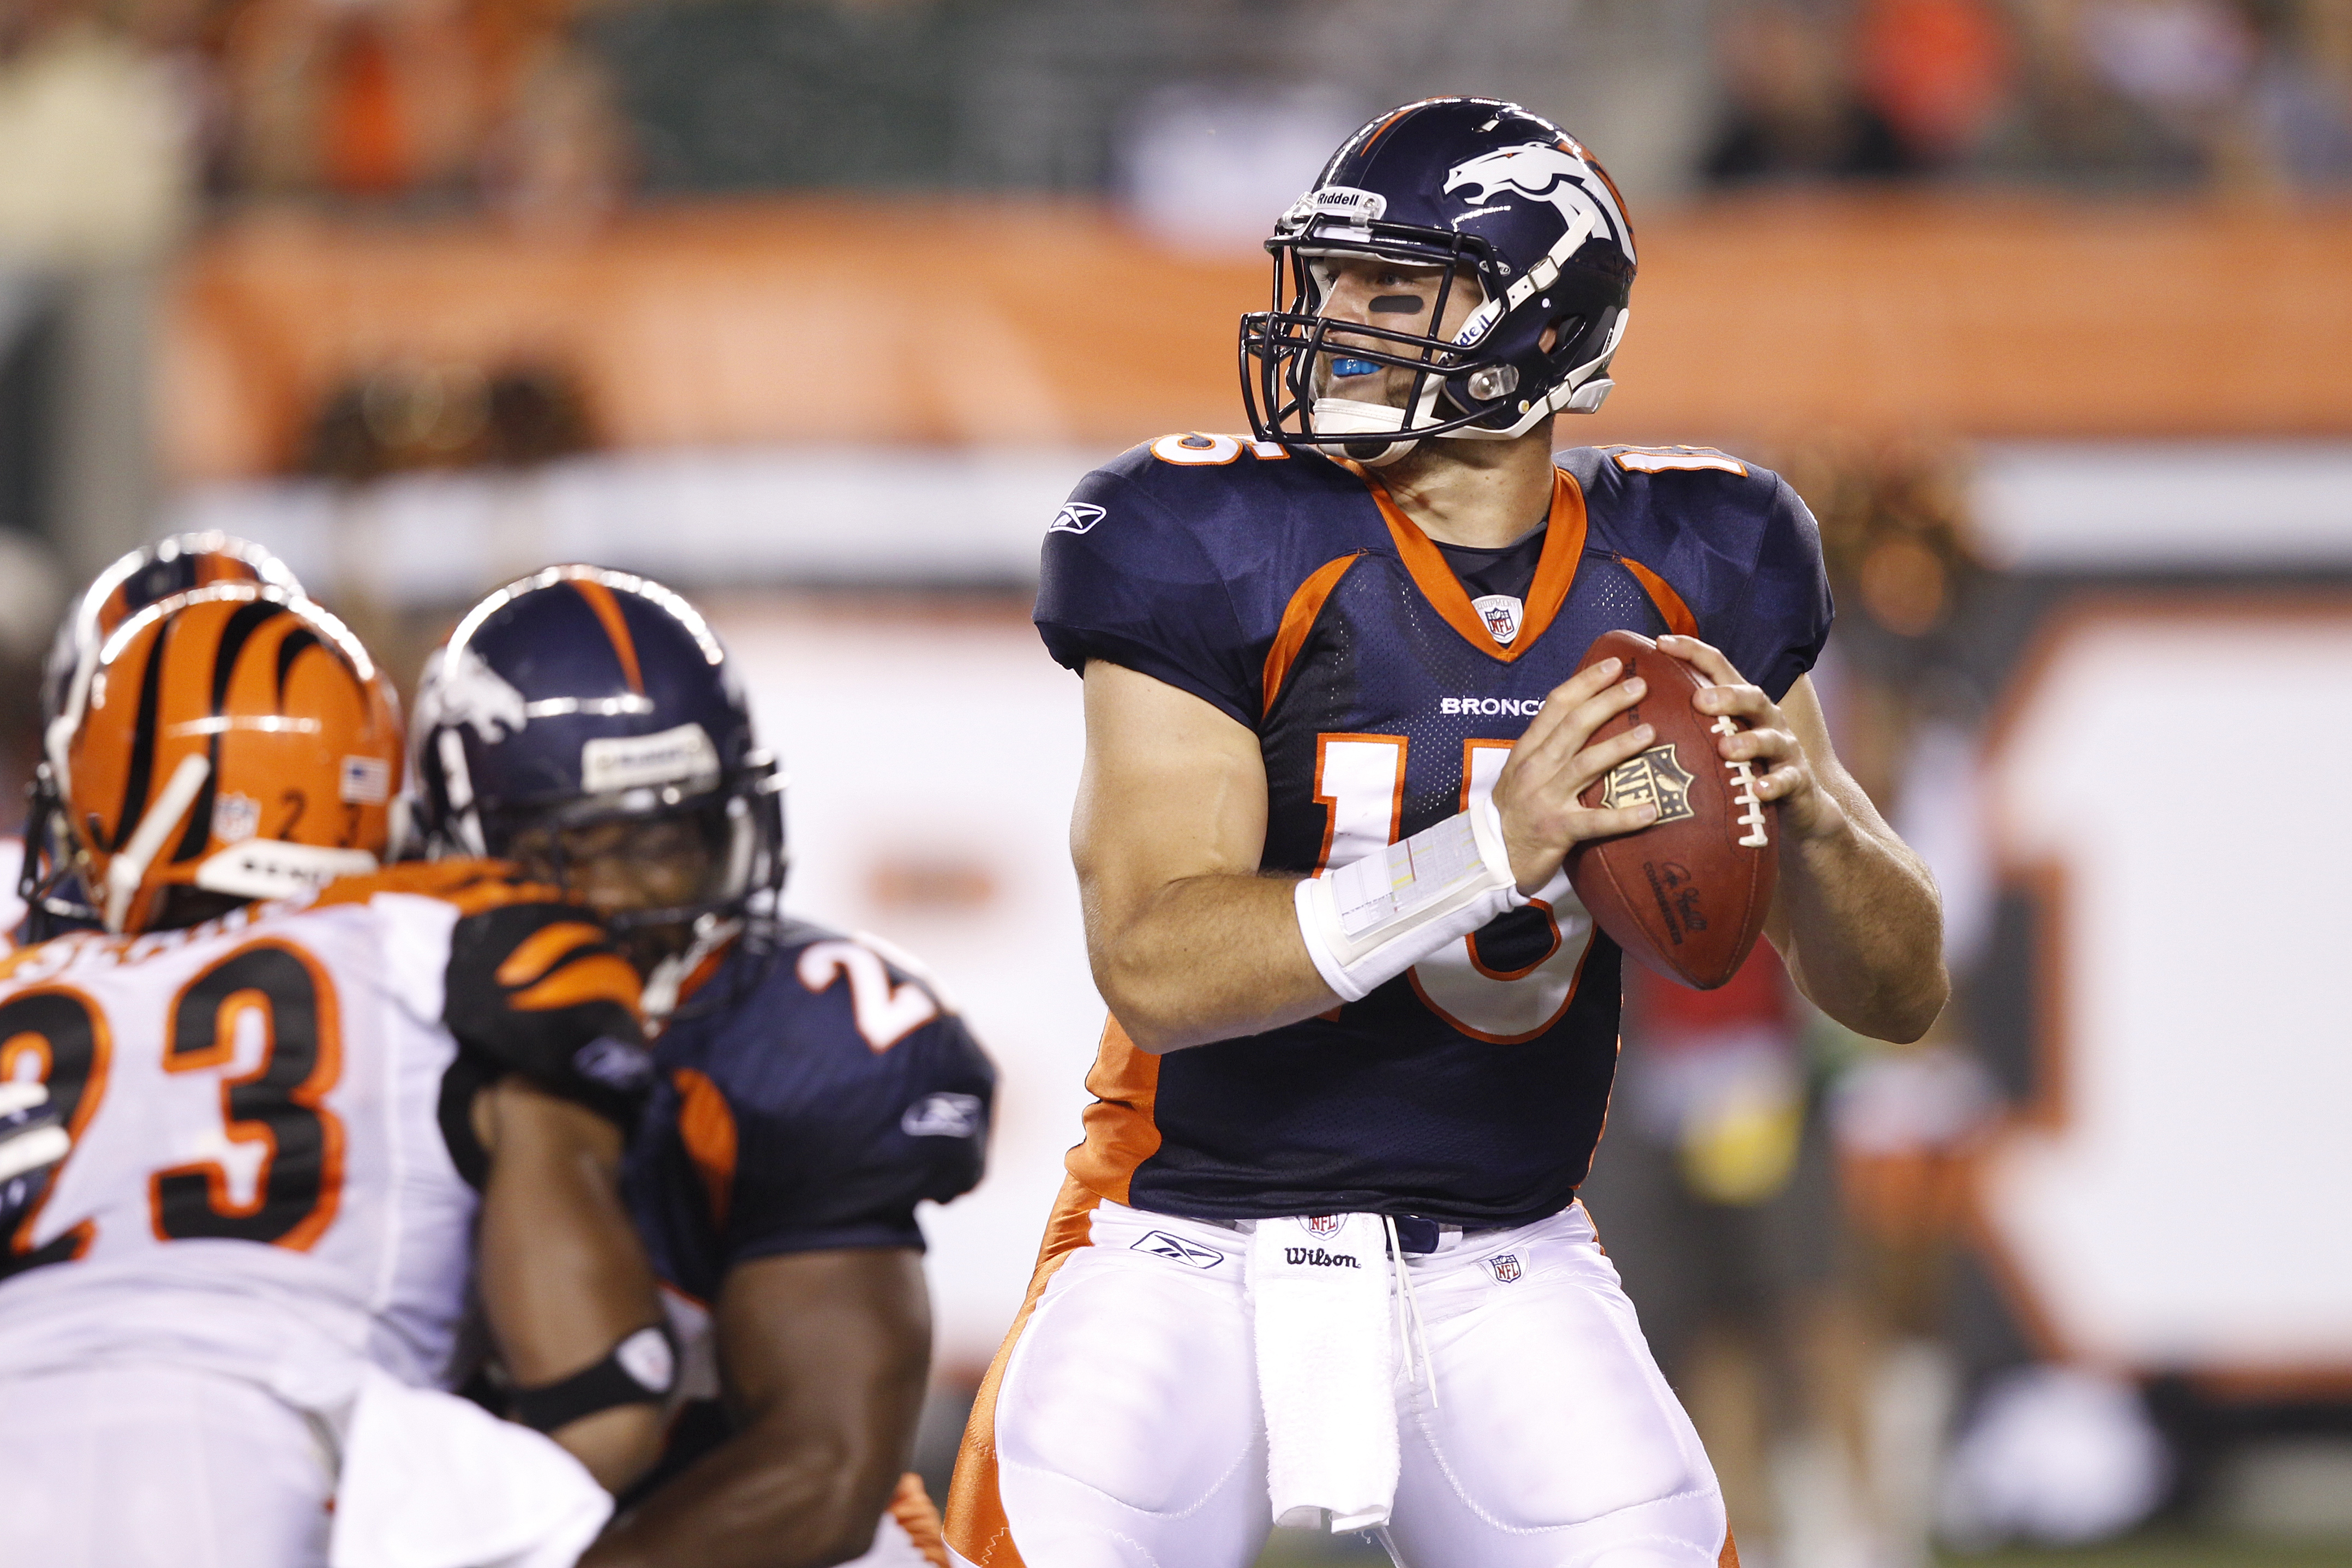 Scoreboard spoofs Tim Tebow with NFL stats